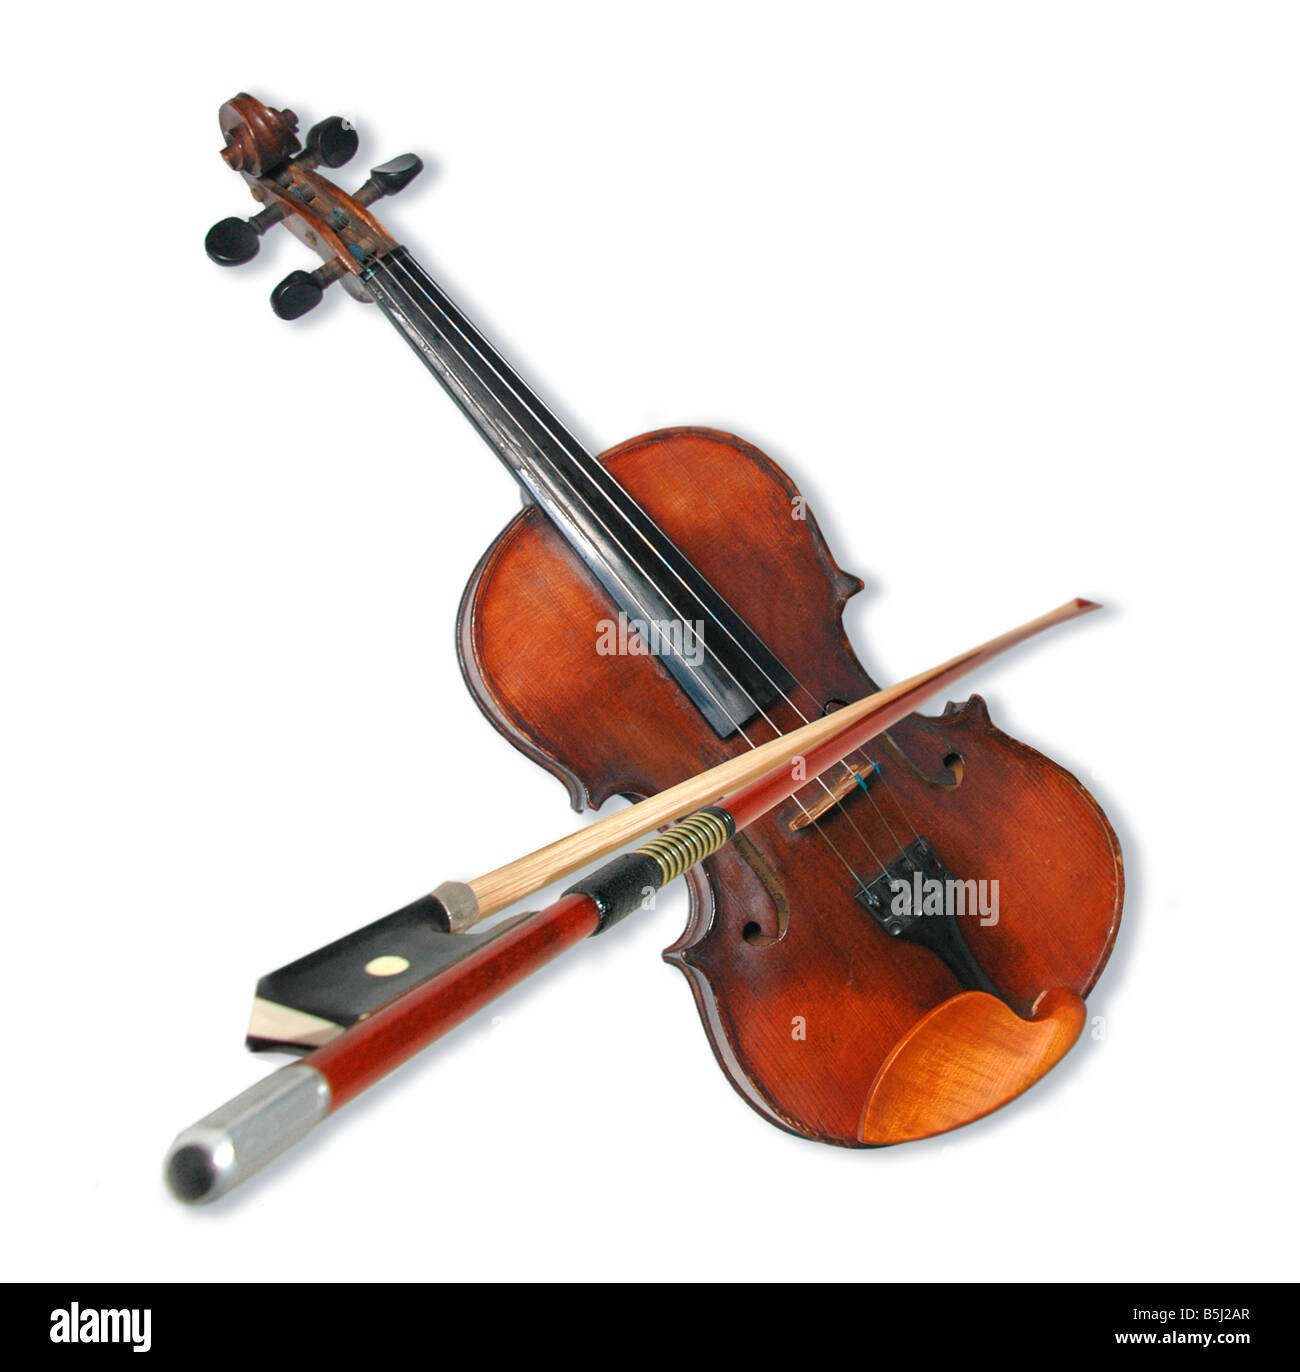 Violin and bow. Stock Photo